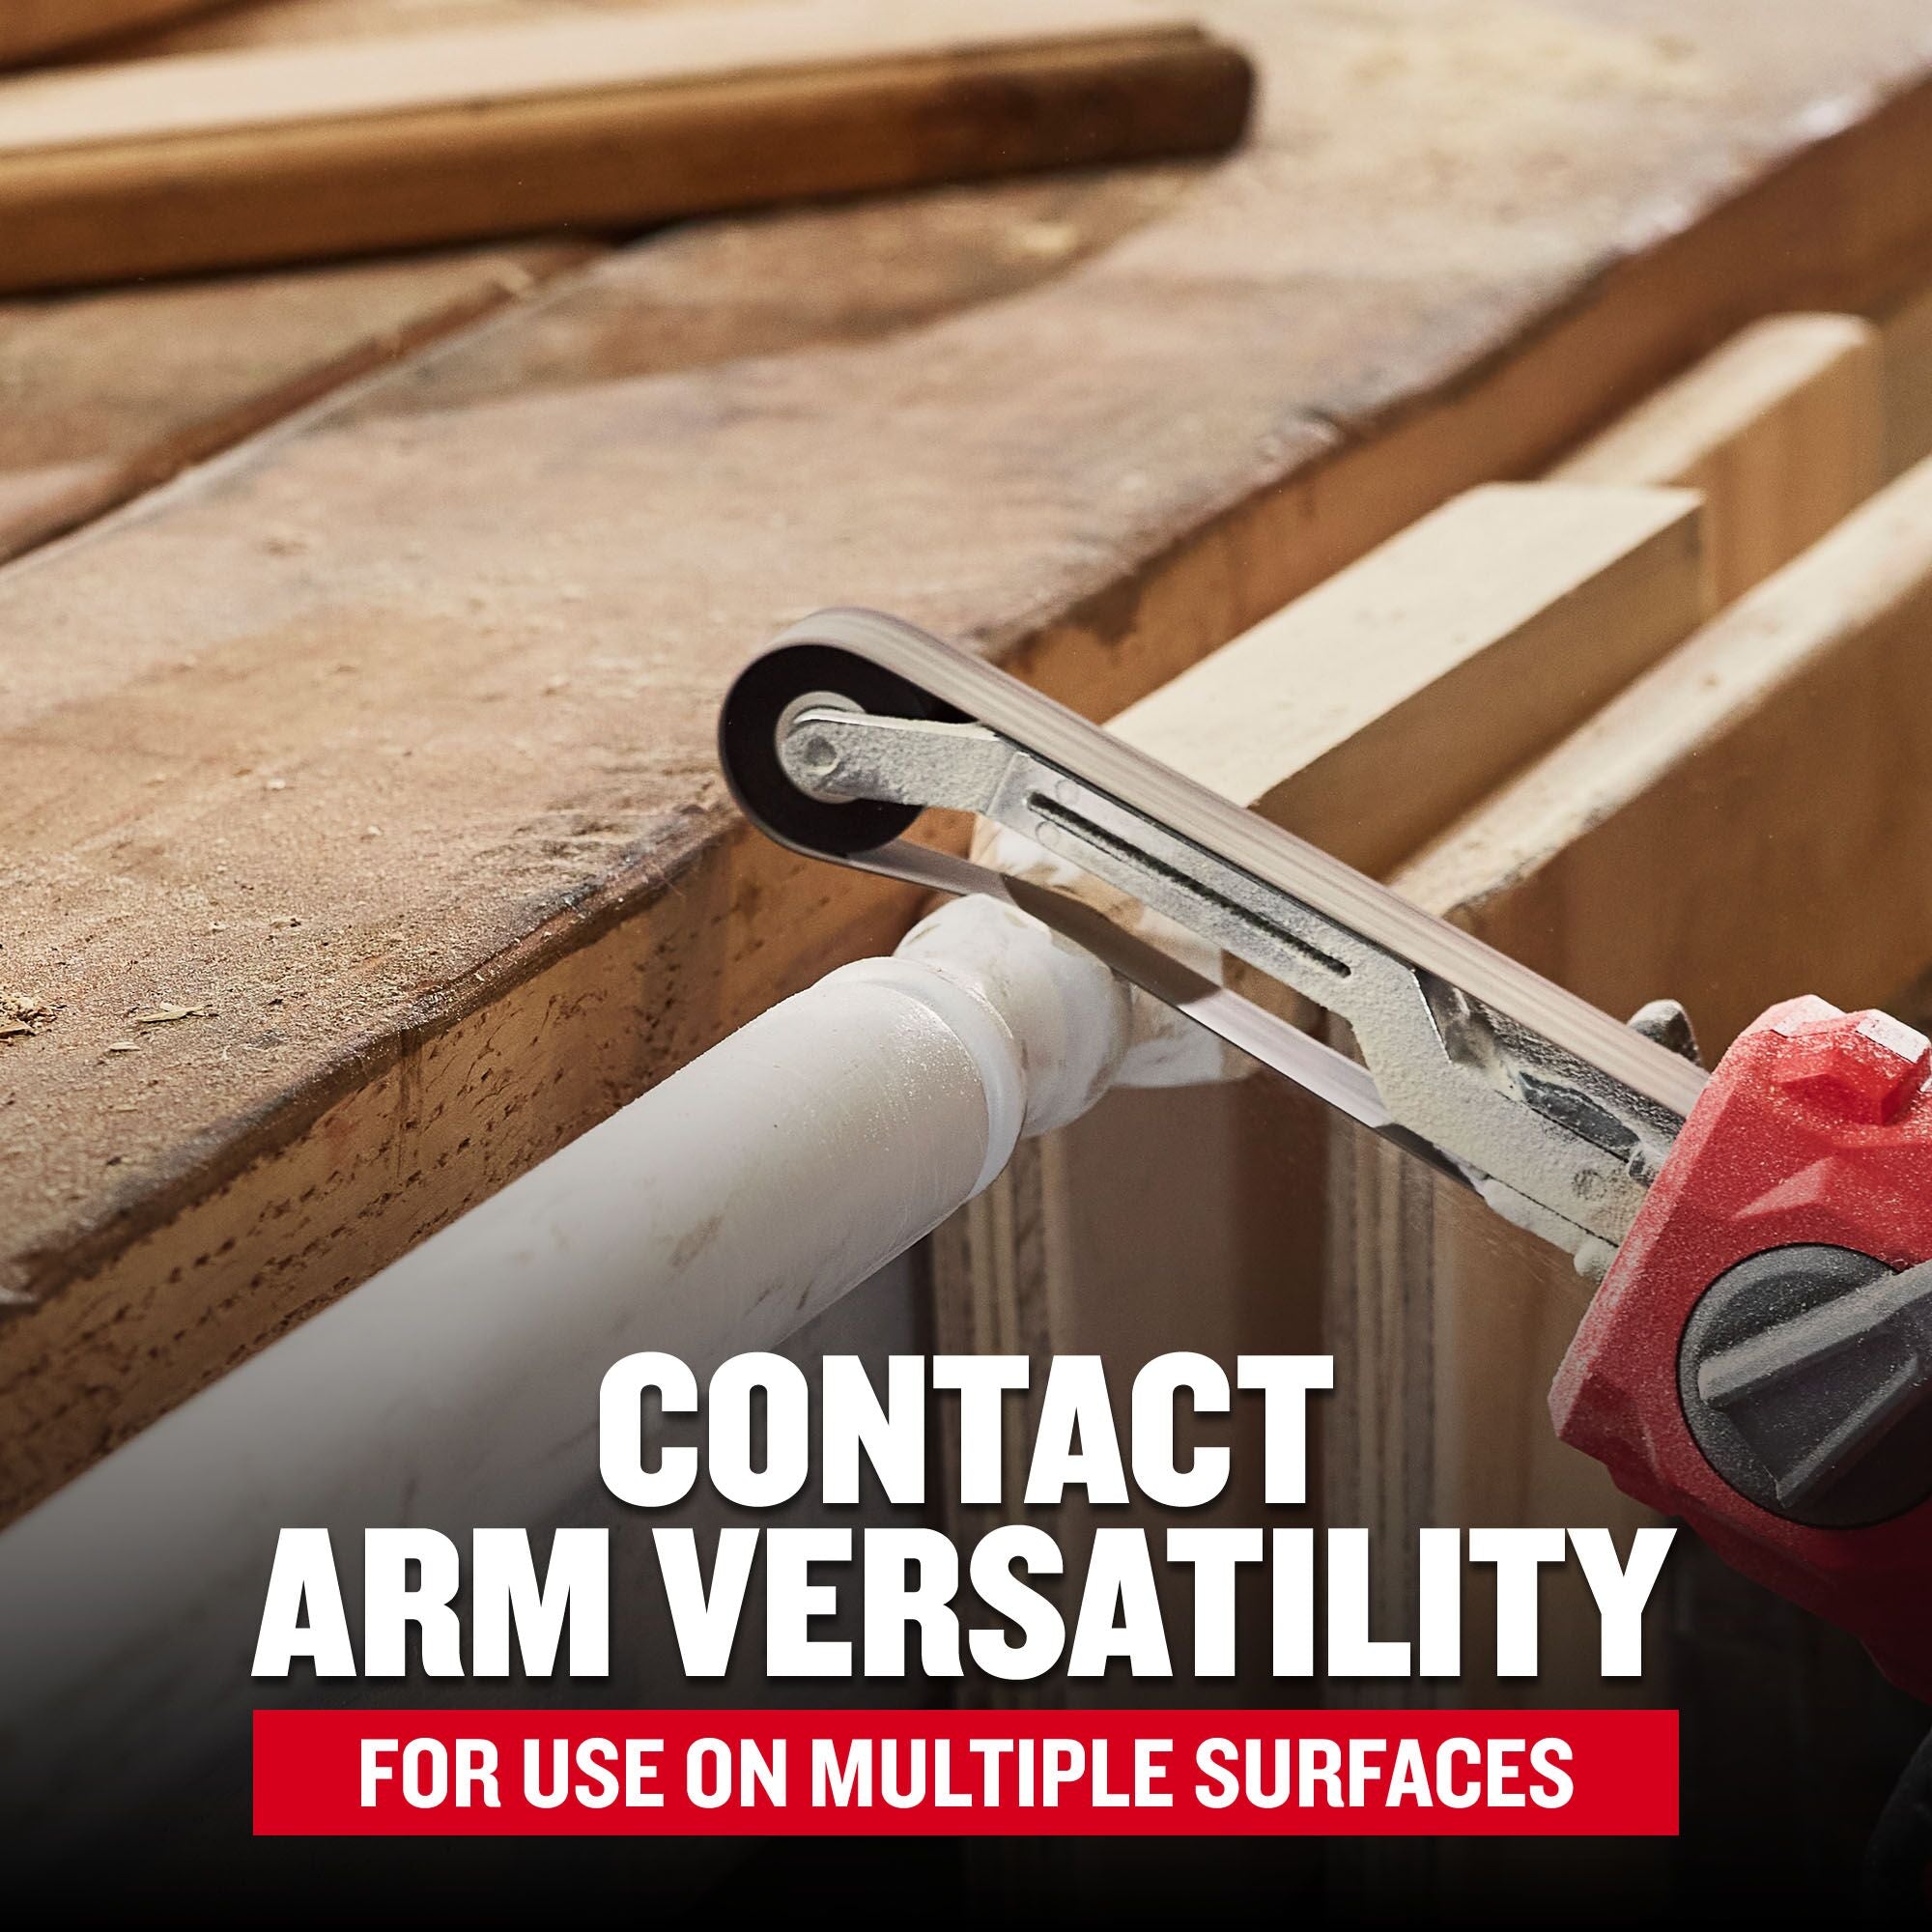 Contact Arm Versatility for use on multiple surfaces